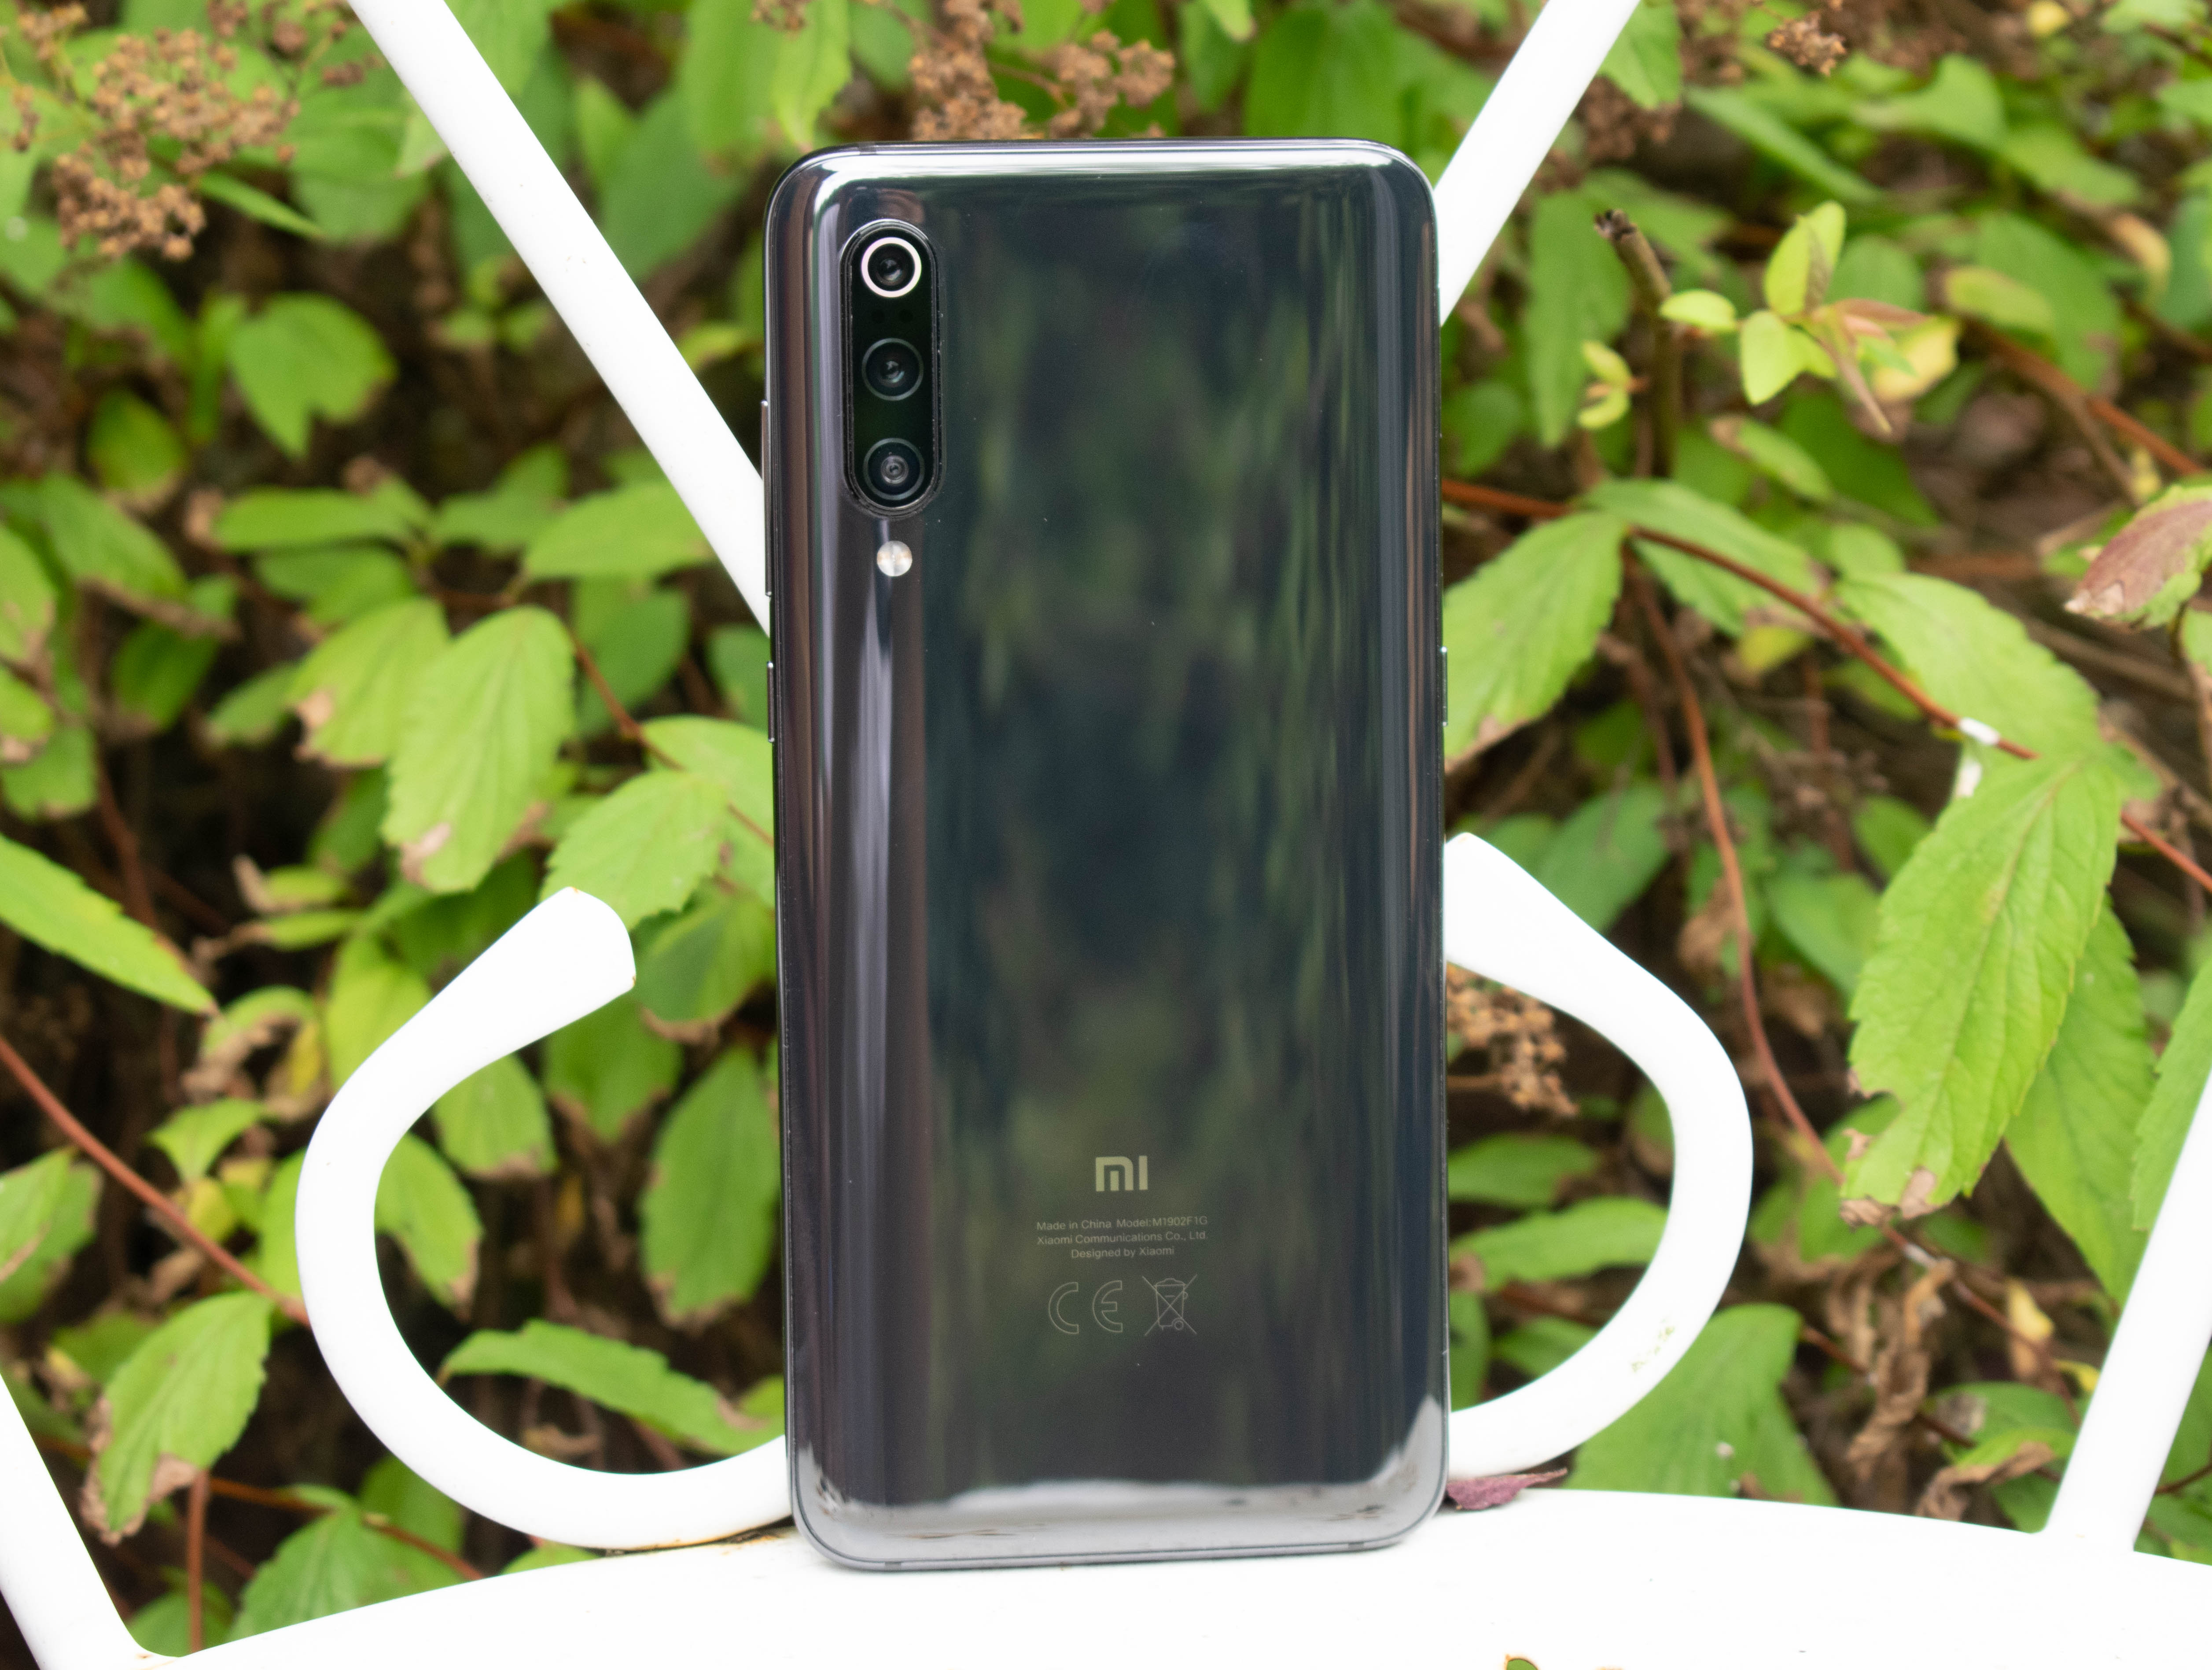 The Xiaomi Mi9 Review: Flagship Performance At a Mid-Range Price